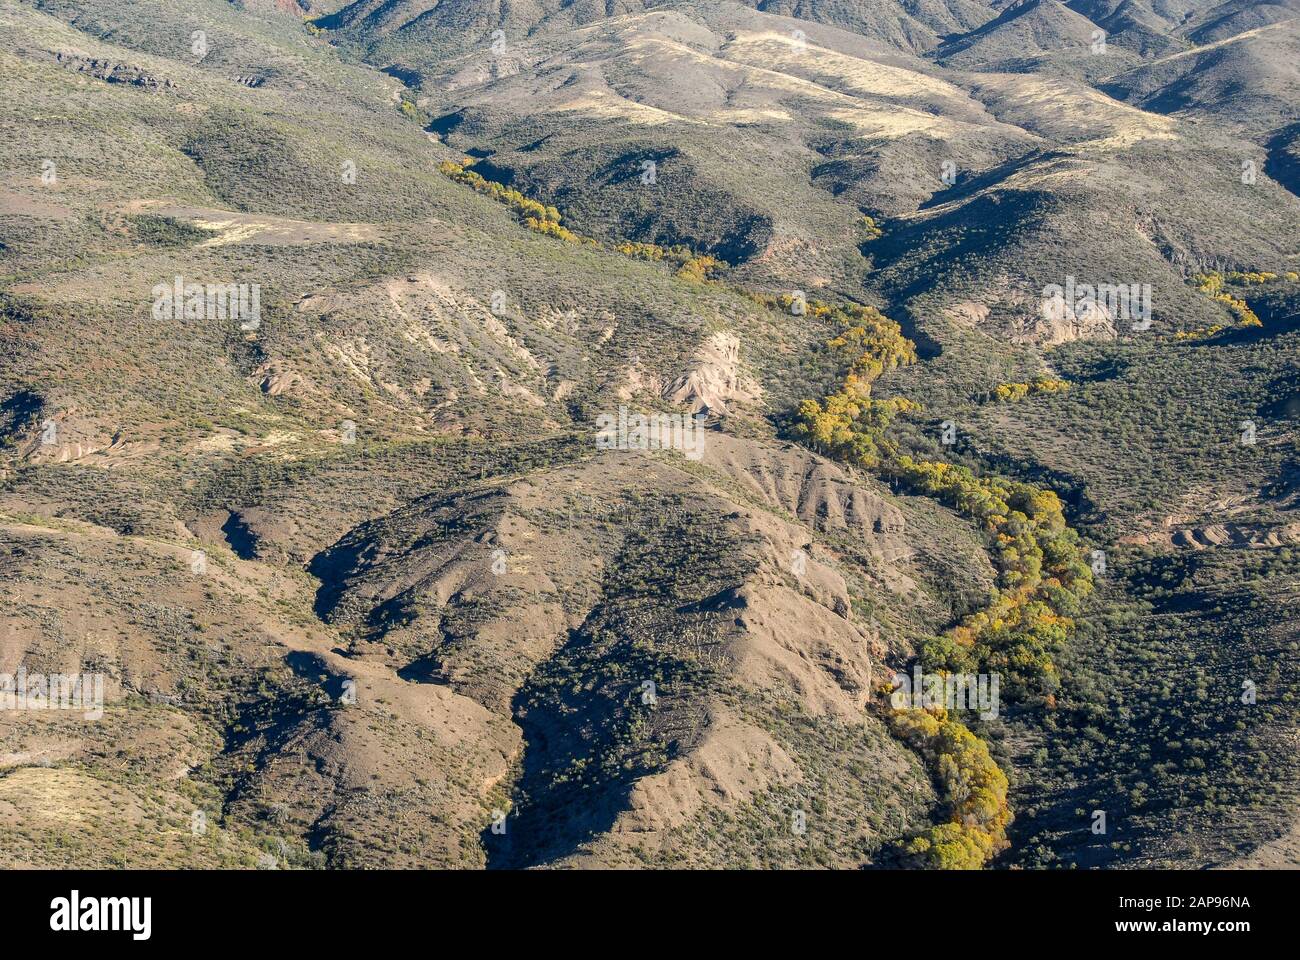 Aerial helicopter view of cottonwood trees snaking along arroyos in an Arizona desert landscape. (USA) Stock Photo